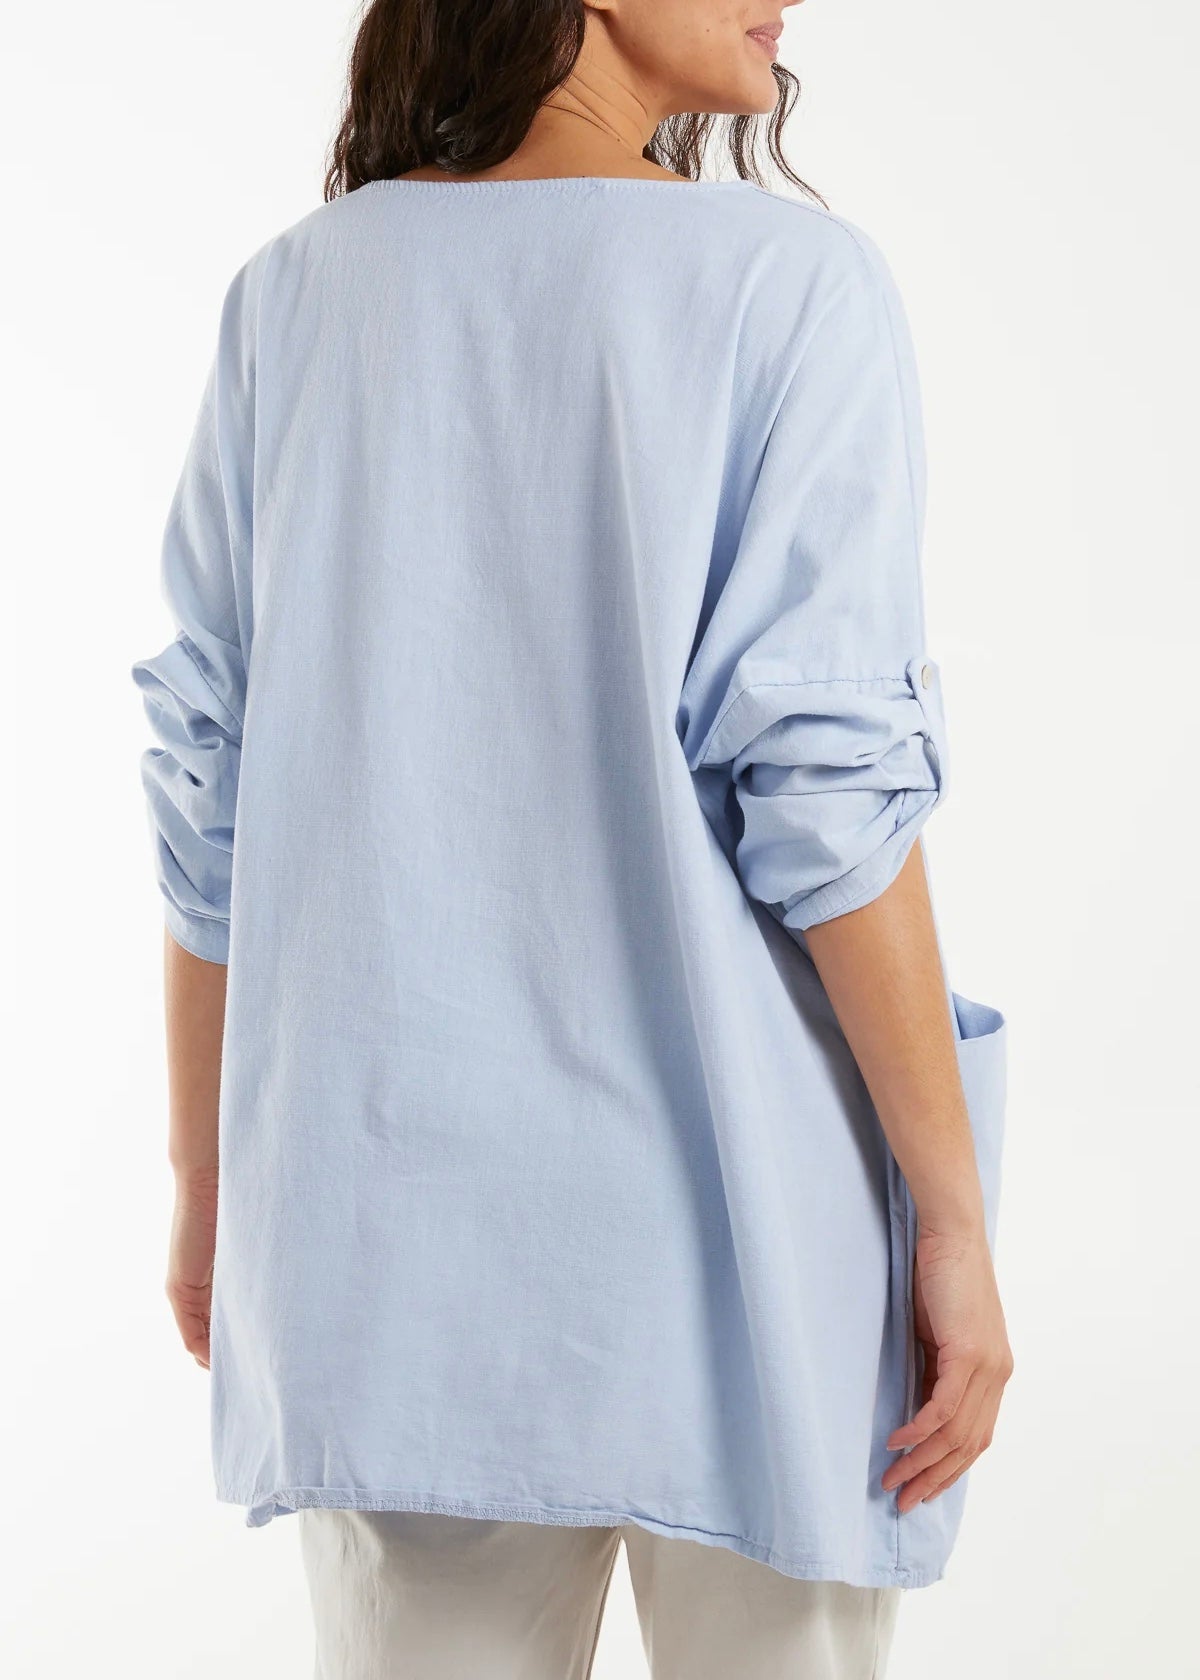 Sands - Relaxed Smock Top / Light Blue